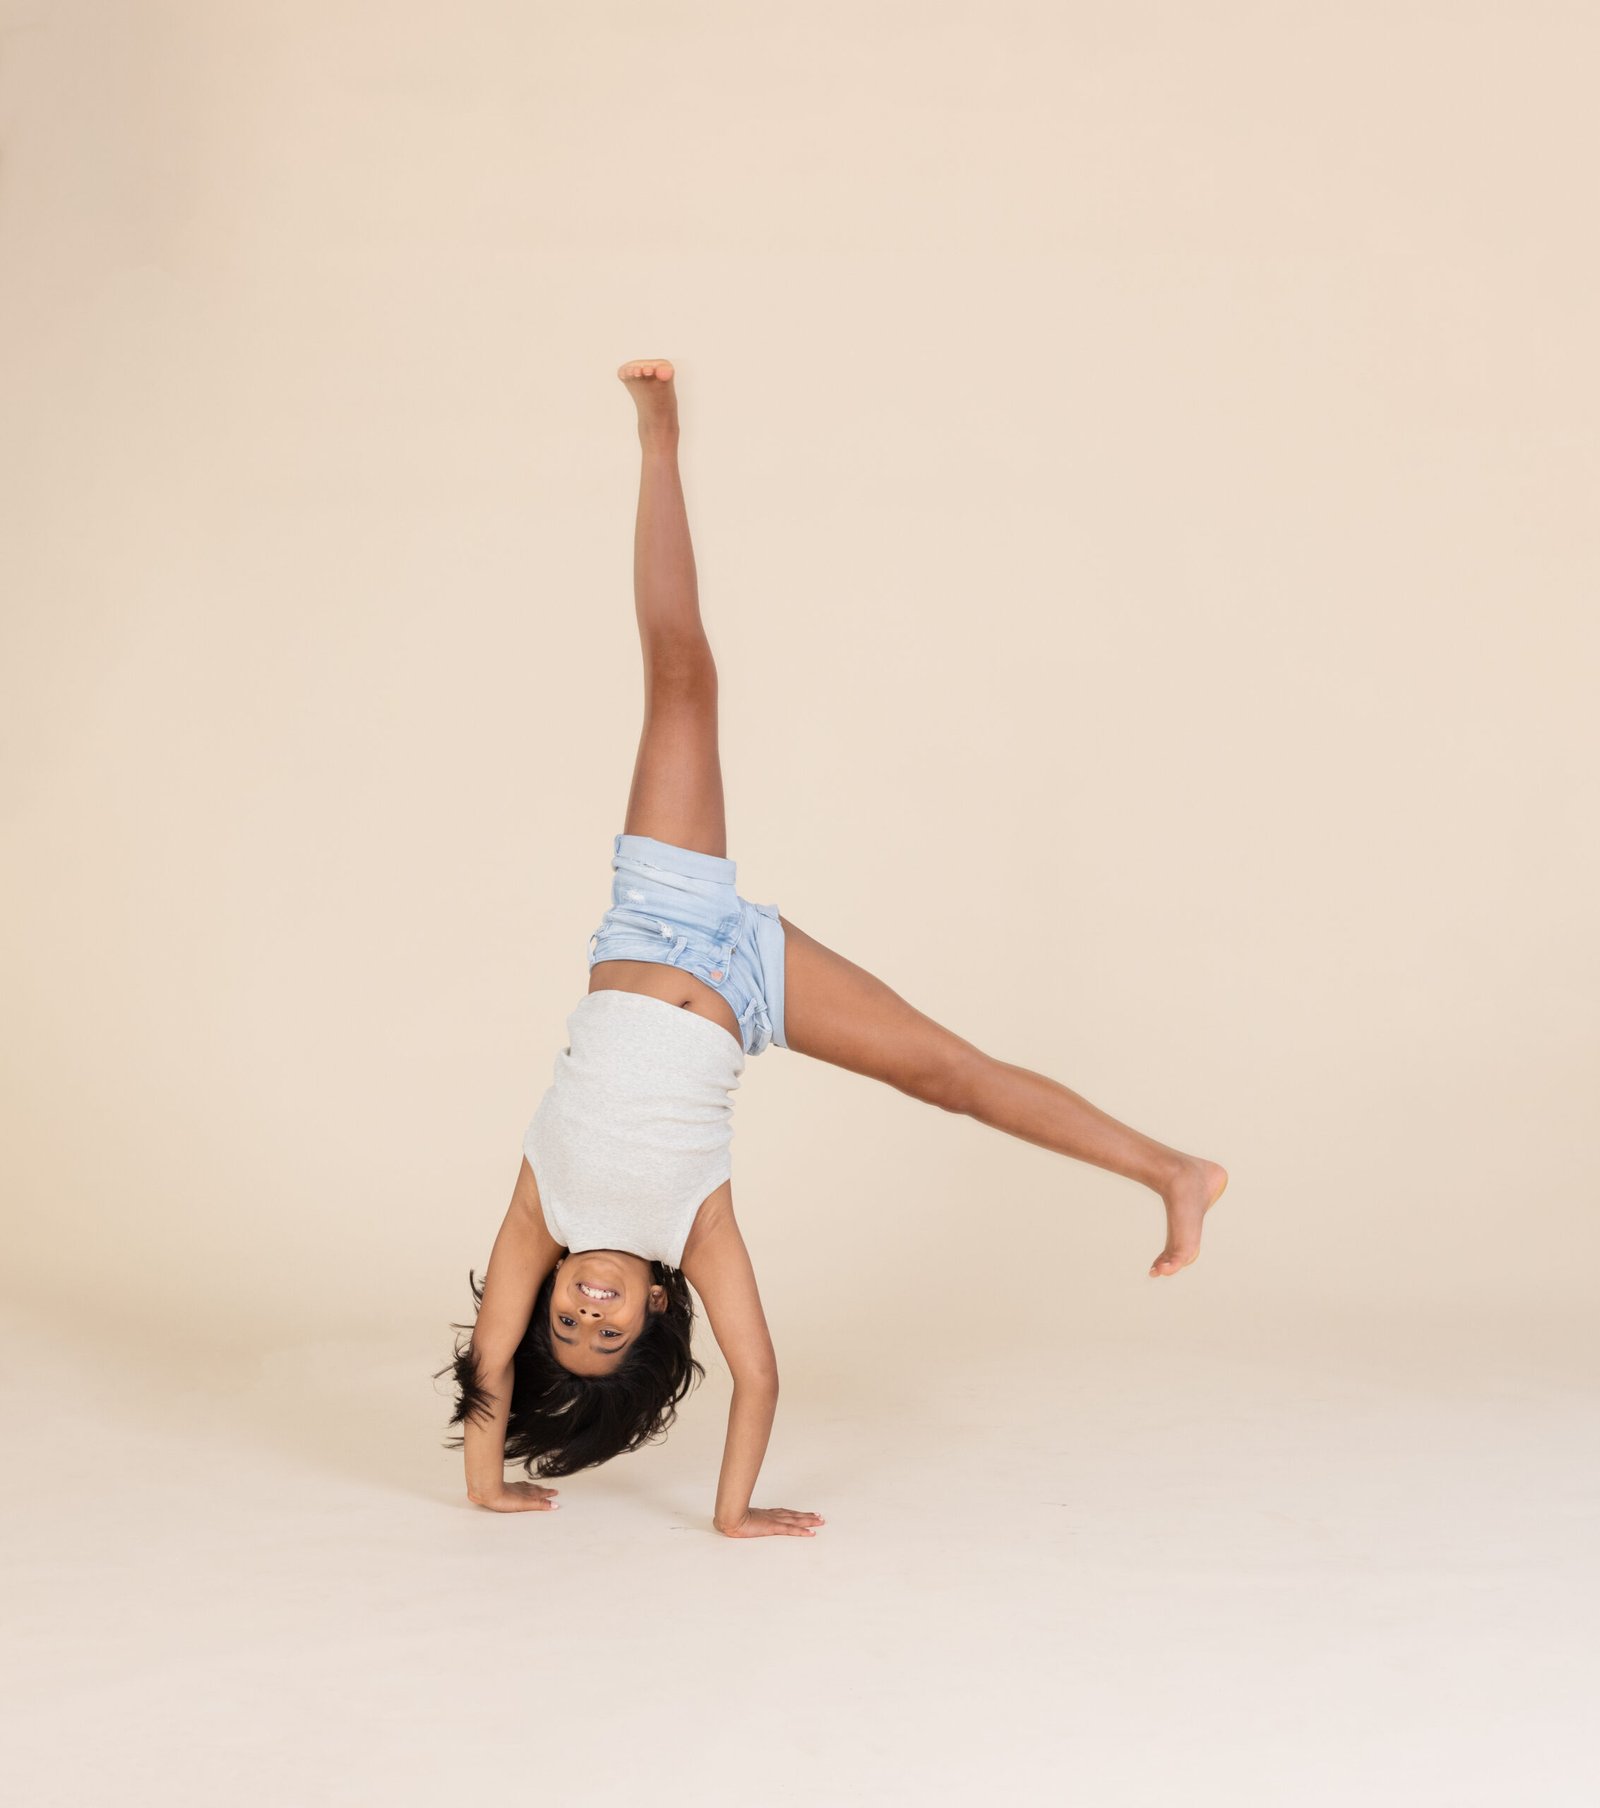 Young Indian American girl having fun and doing a cartwheel at Malone Portraits photo studio